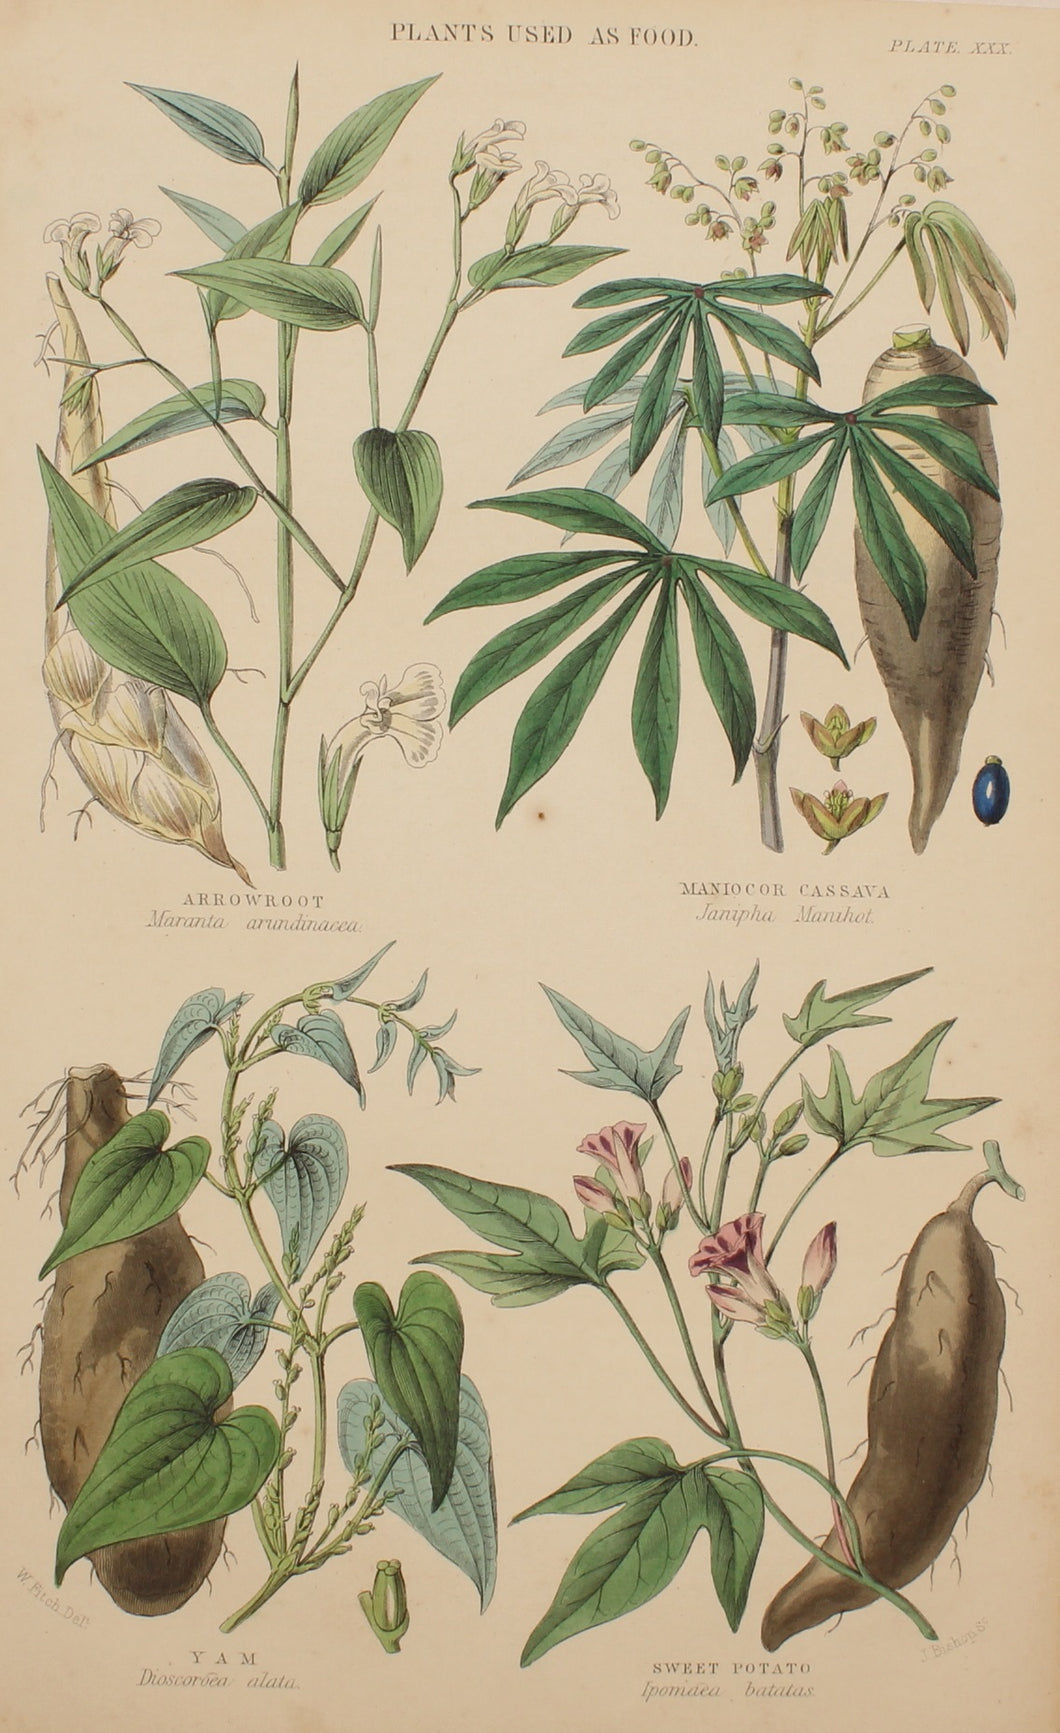 Botanical, Fitch W, Plants used as Food, Plate XXX, 1850